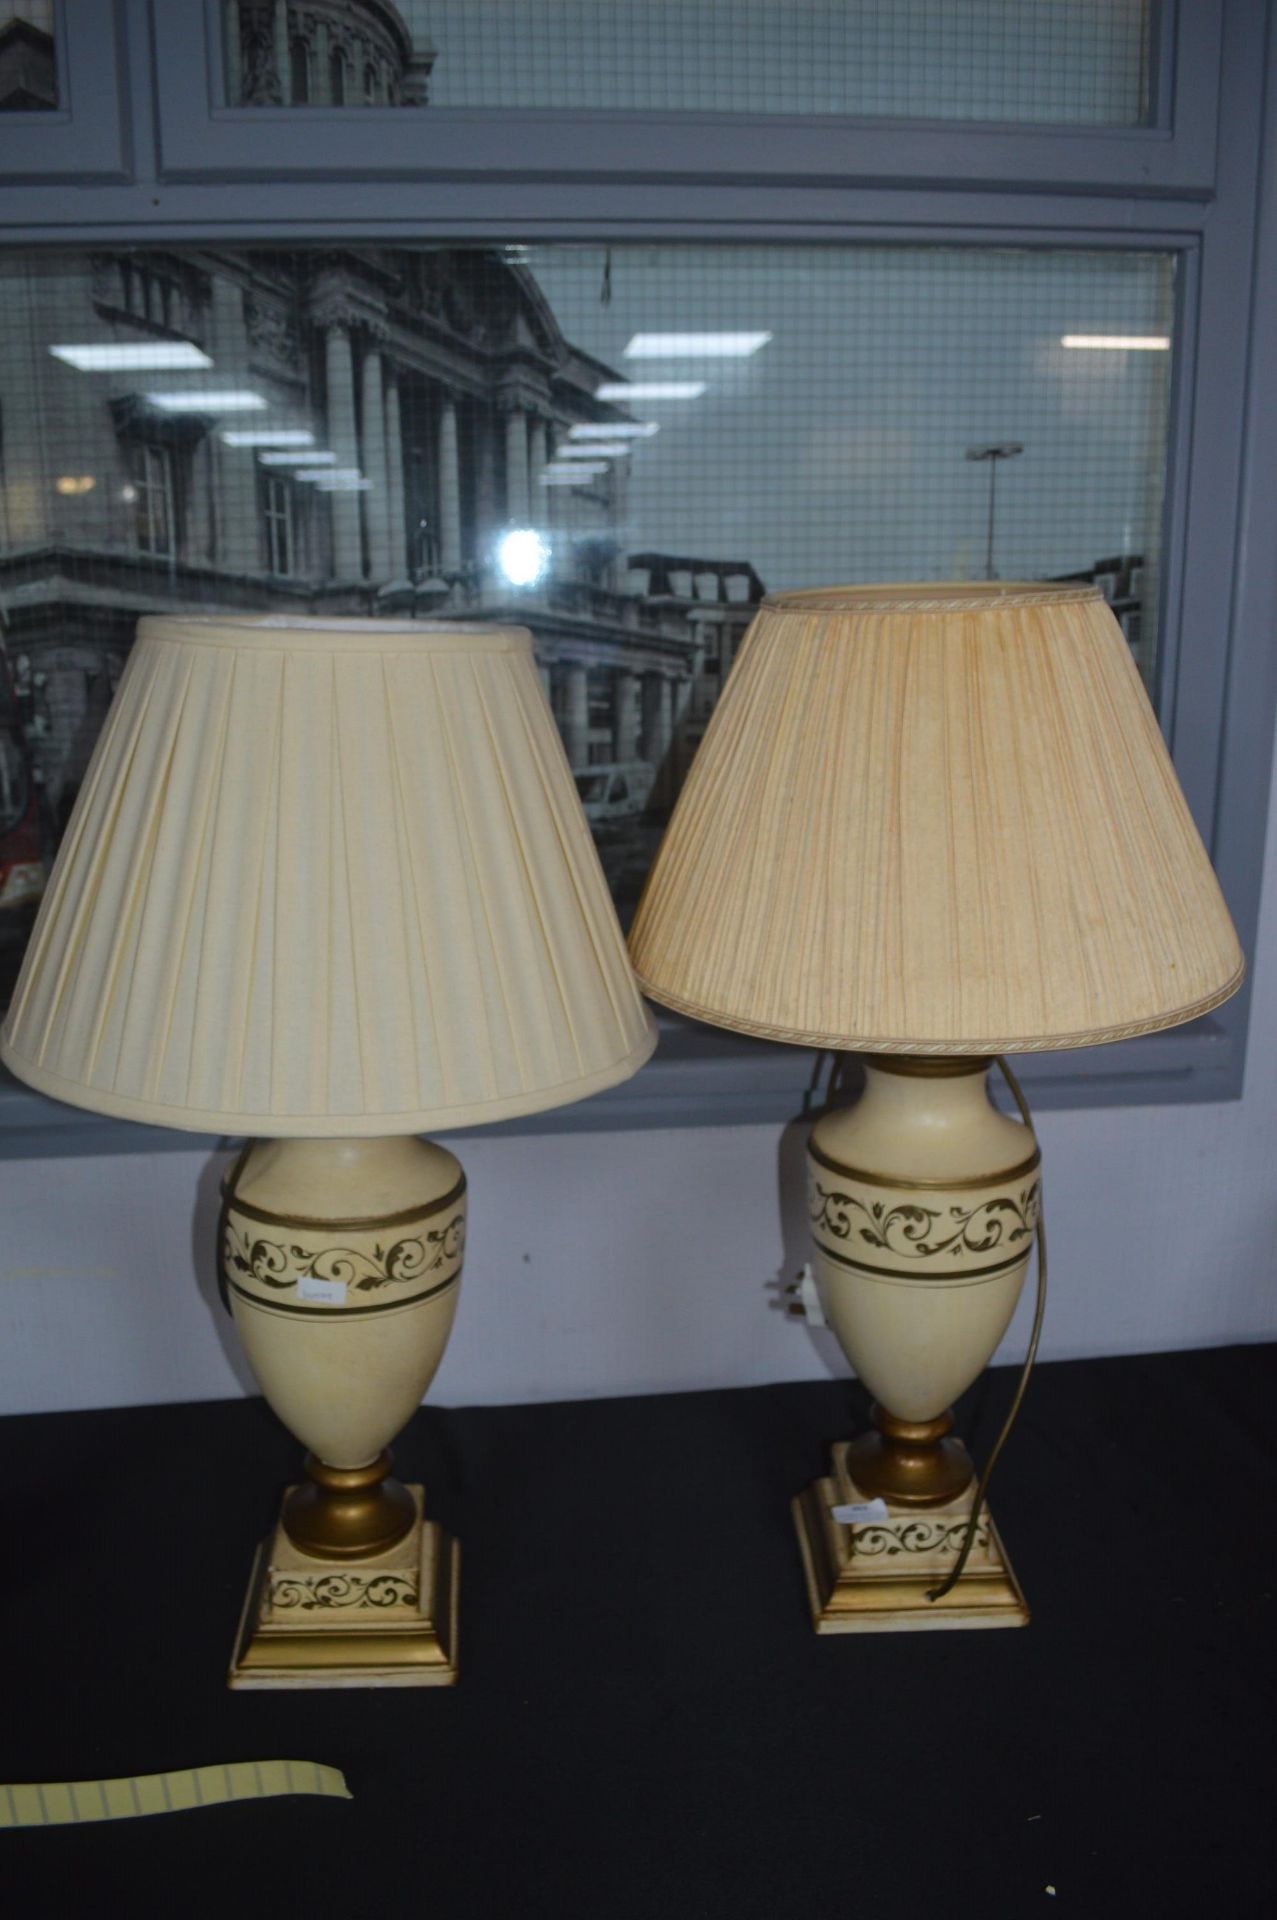 Pair of Table Lamps with Cream Shades